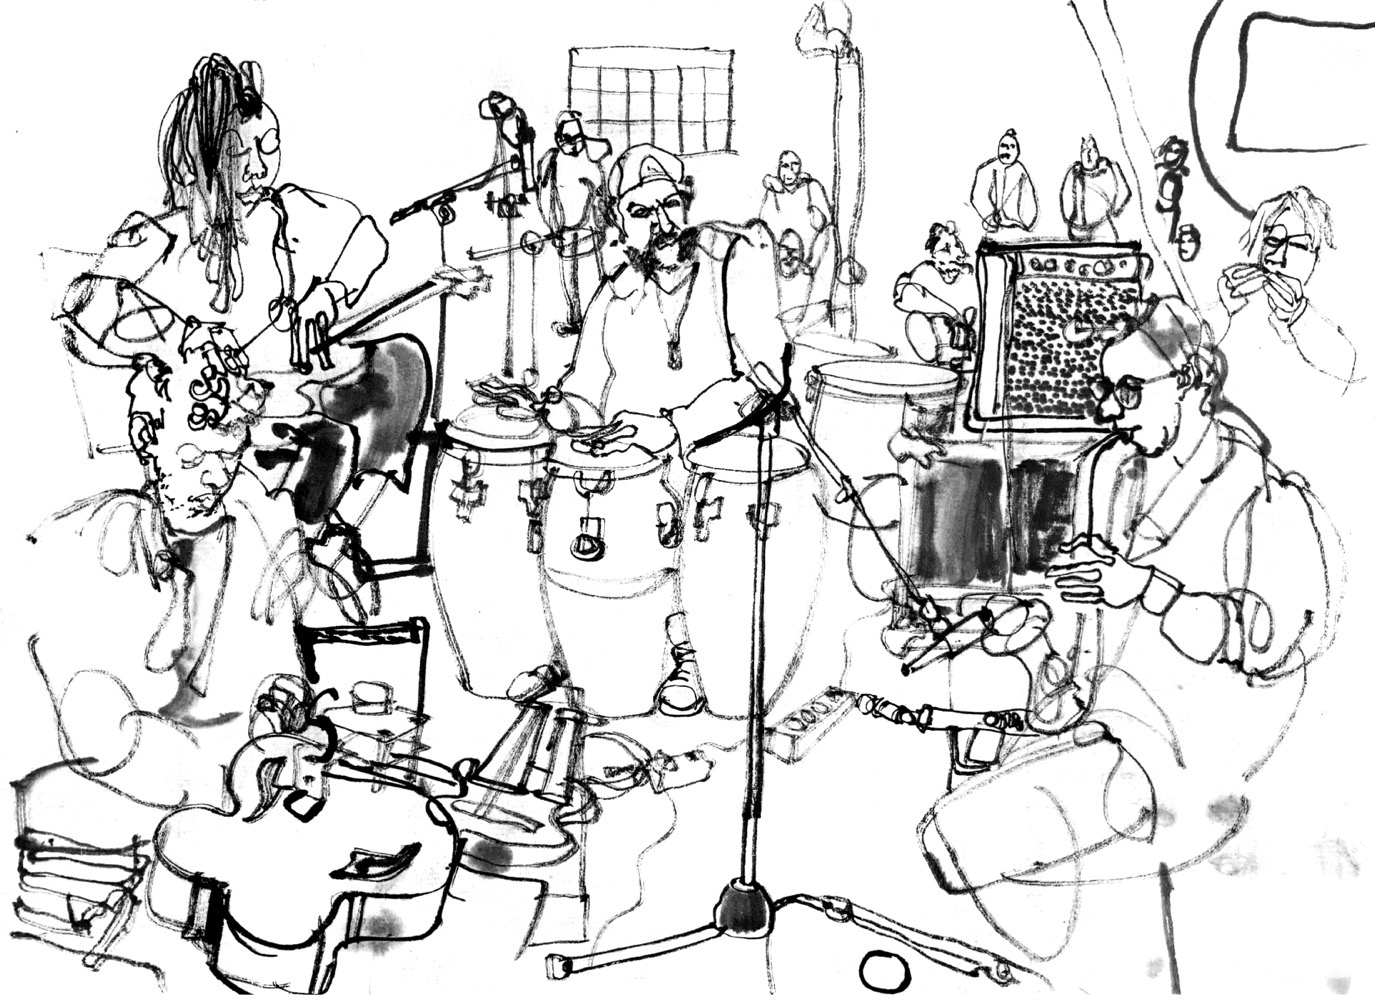 Ink drawing of five musicians and some audience.